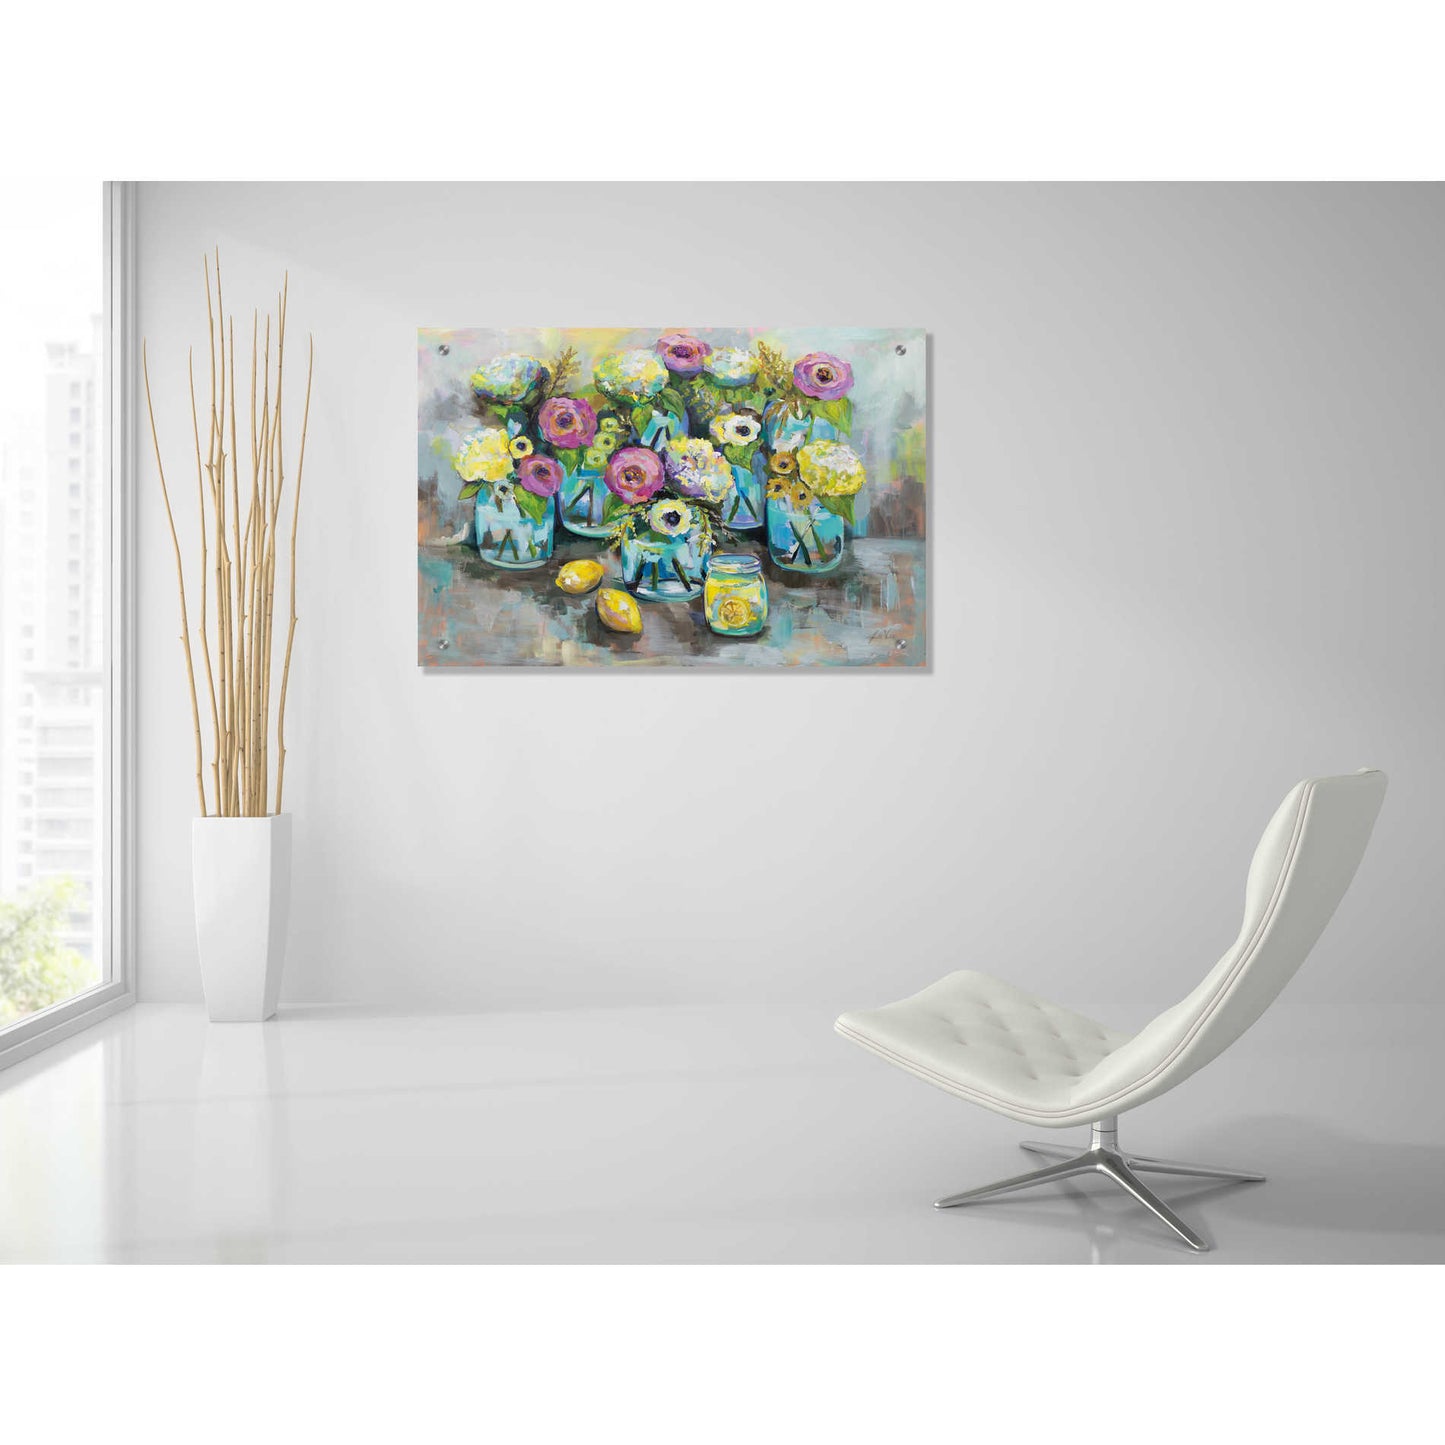 Epic Art 'When Life Gives You Lemons' by Jeanette Vertentes, Acrylic Glass Wall Art,36x24